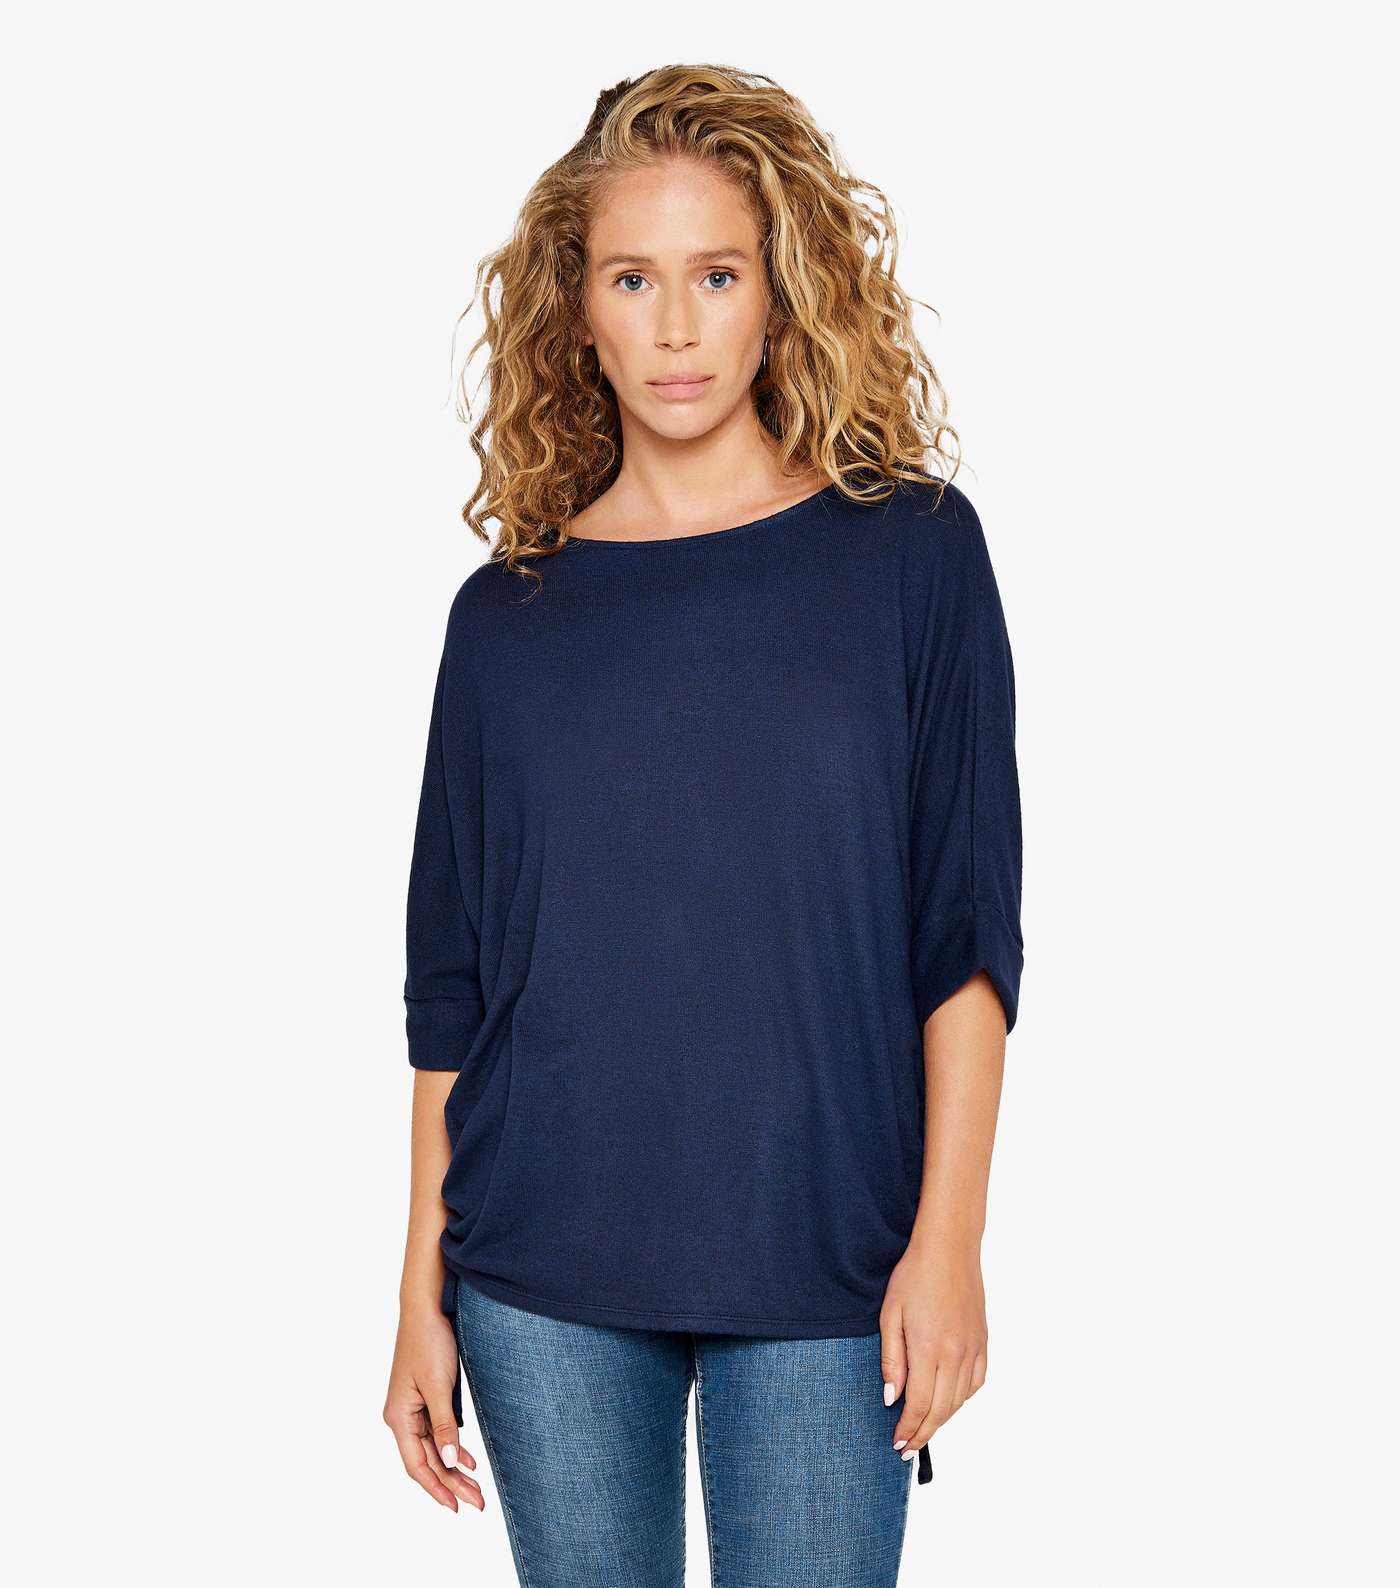 Apricot Navy Soft Touch Ruched Side Batwing Top Image 4